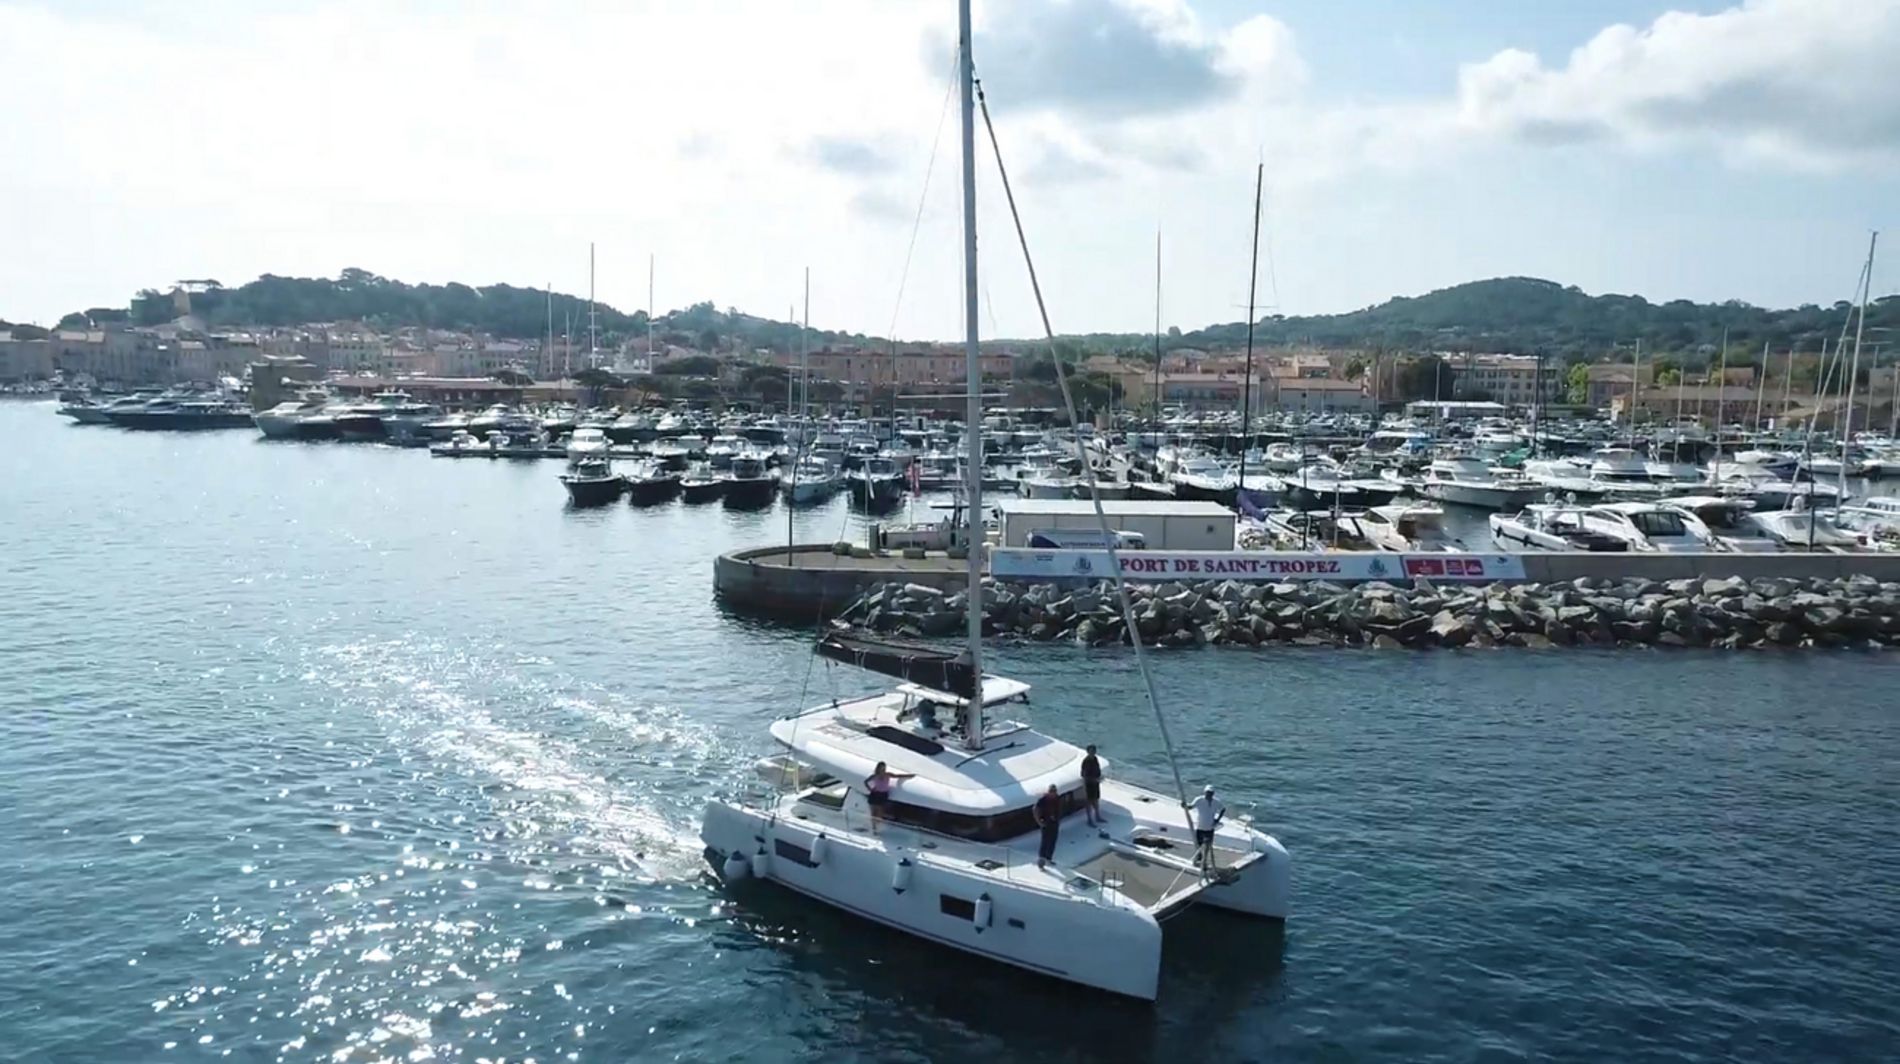 French Riviera tour by Alain Cyr with our Lagoon 42